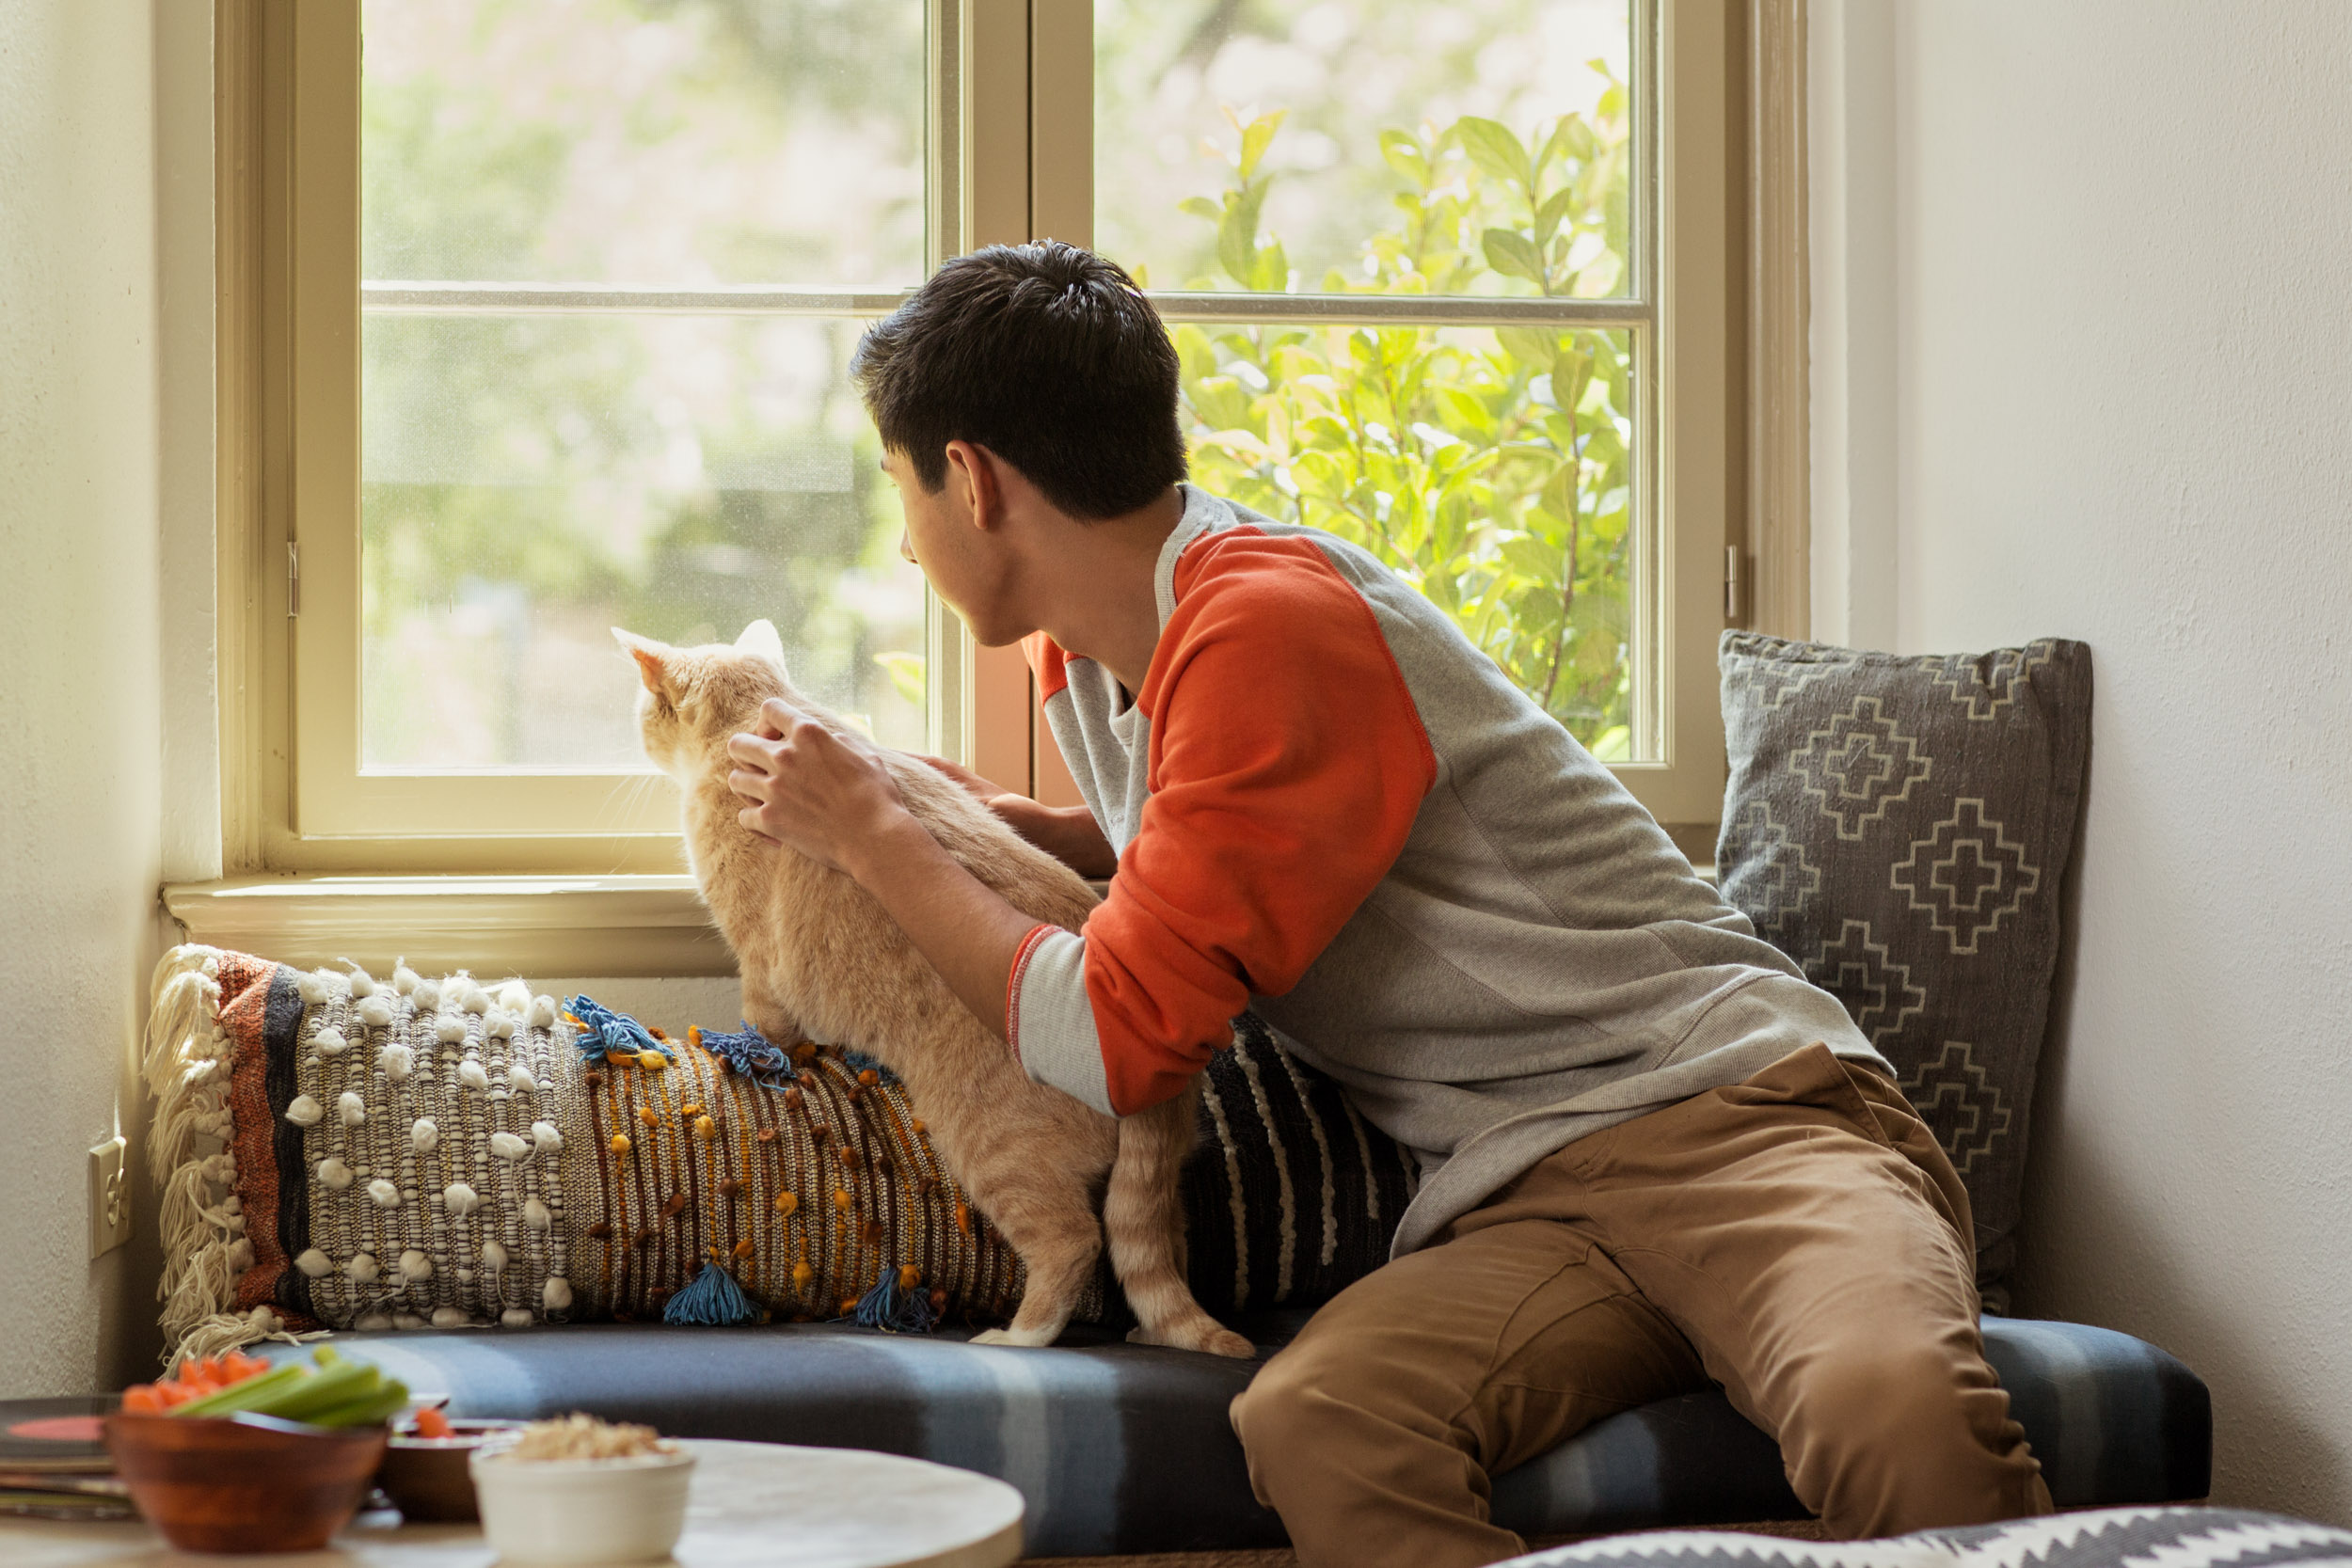 man and cat on couch looking out window together